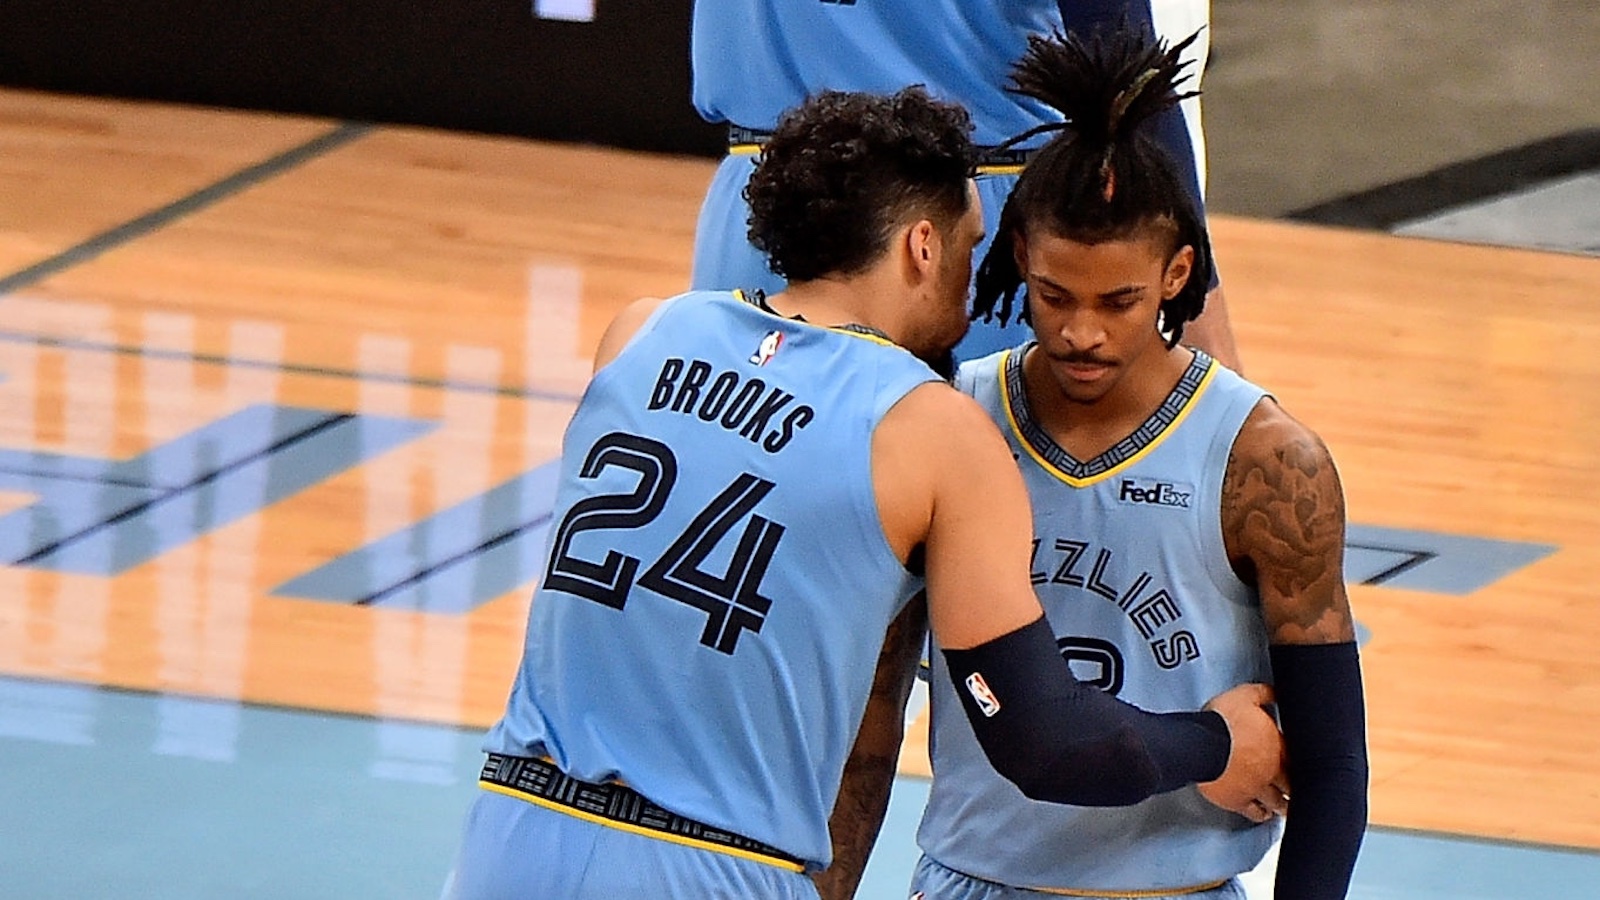 Justin Kubatko total of 47 players have scored at least 100 points through their first four career NBA playoff games. The Ja Morant (124) and Dillon Brooks (101)